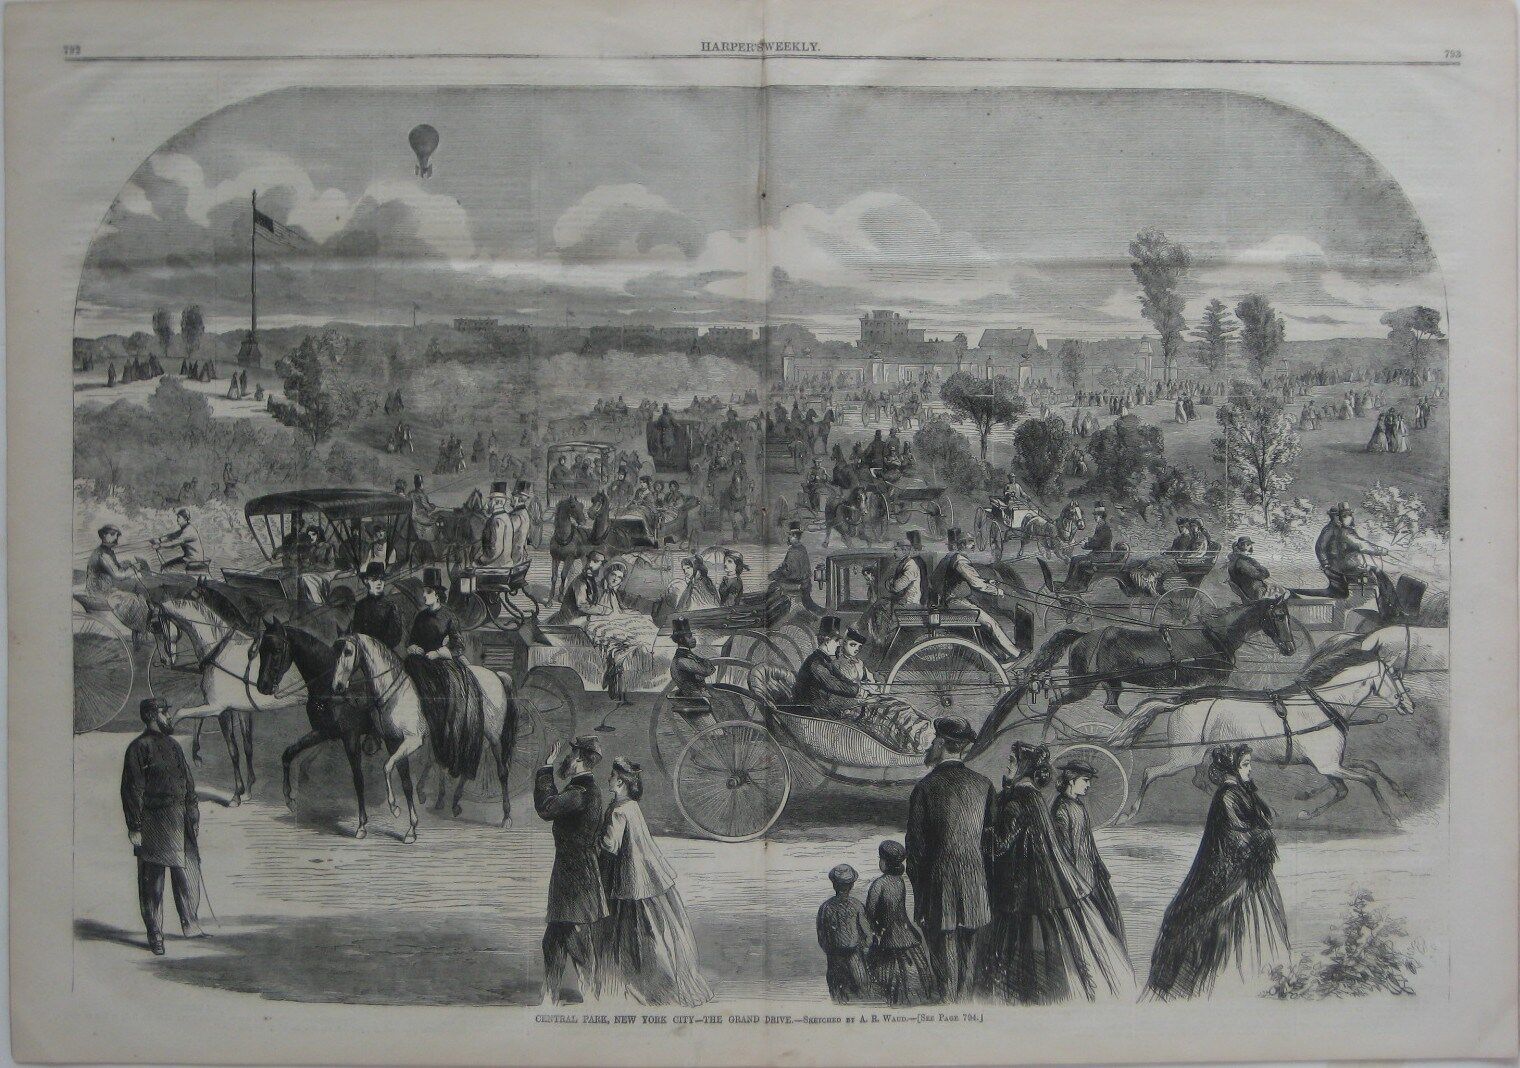 Original CENTRAL PARK NEW YORK CITY Complete Issue 1865 Harper's Weekly Balloon